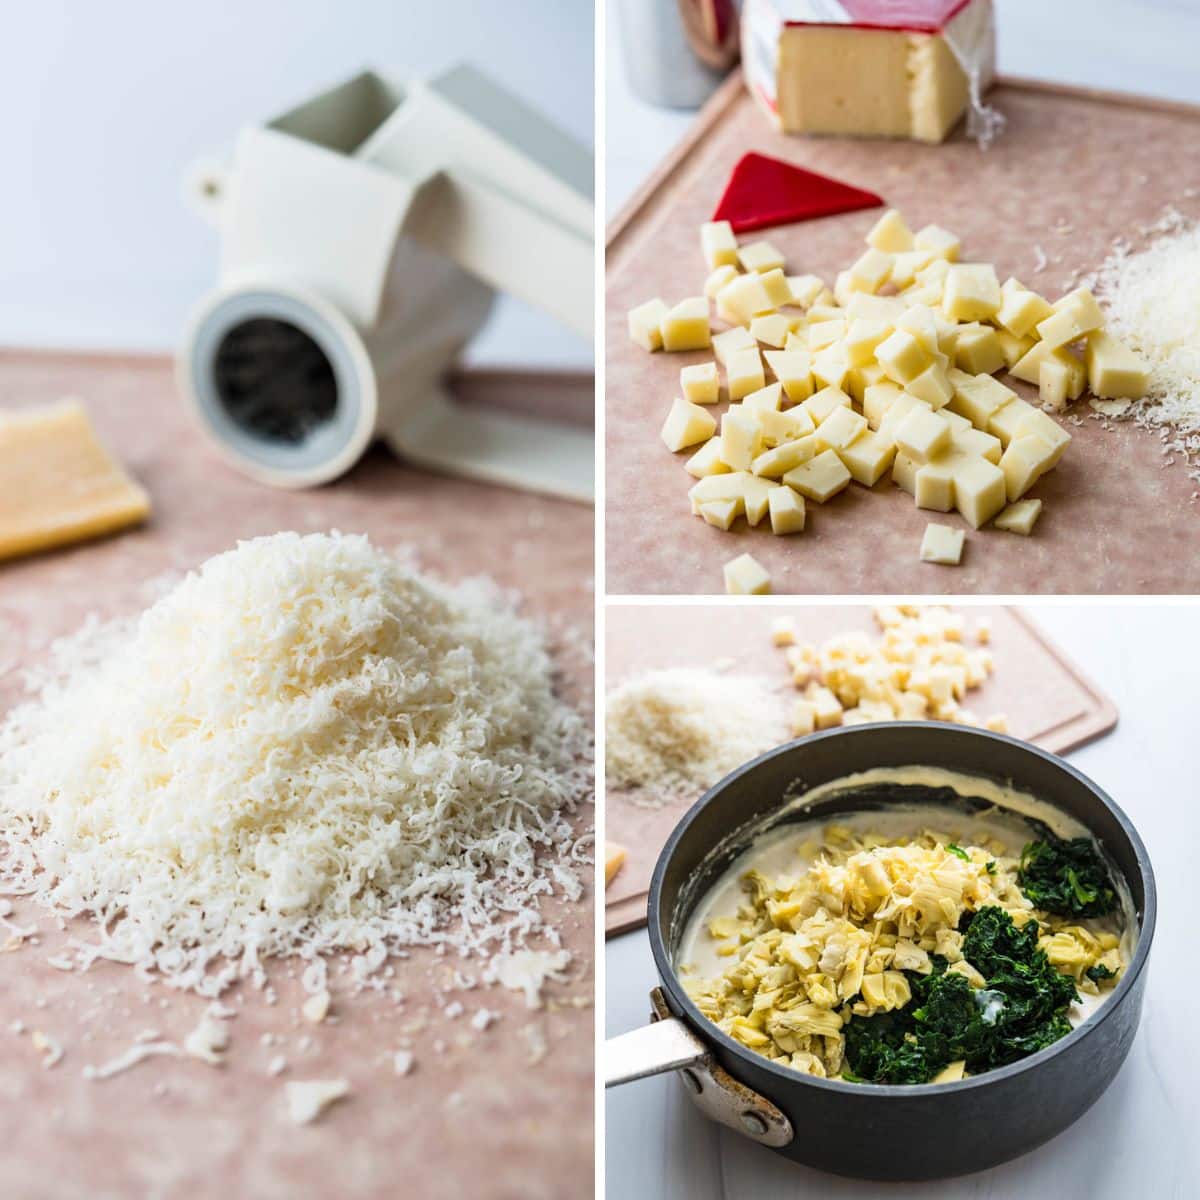 grating and dicing the parmesan and fontina cheeses to mix with the baked spinach artichoke dip mixture.